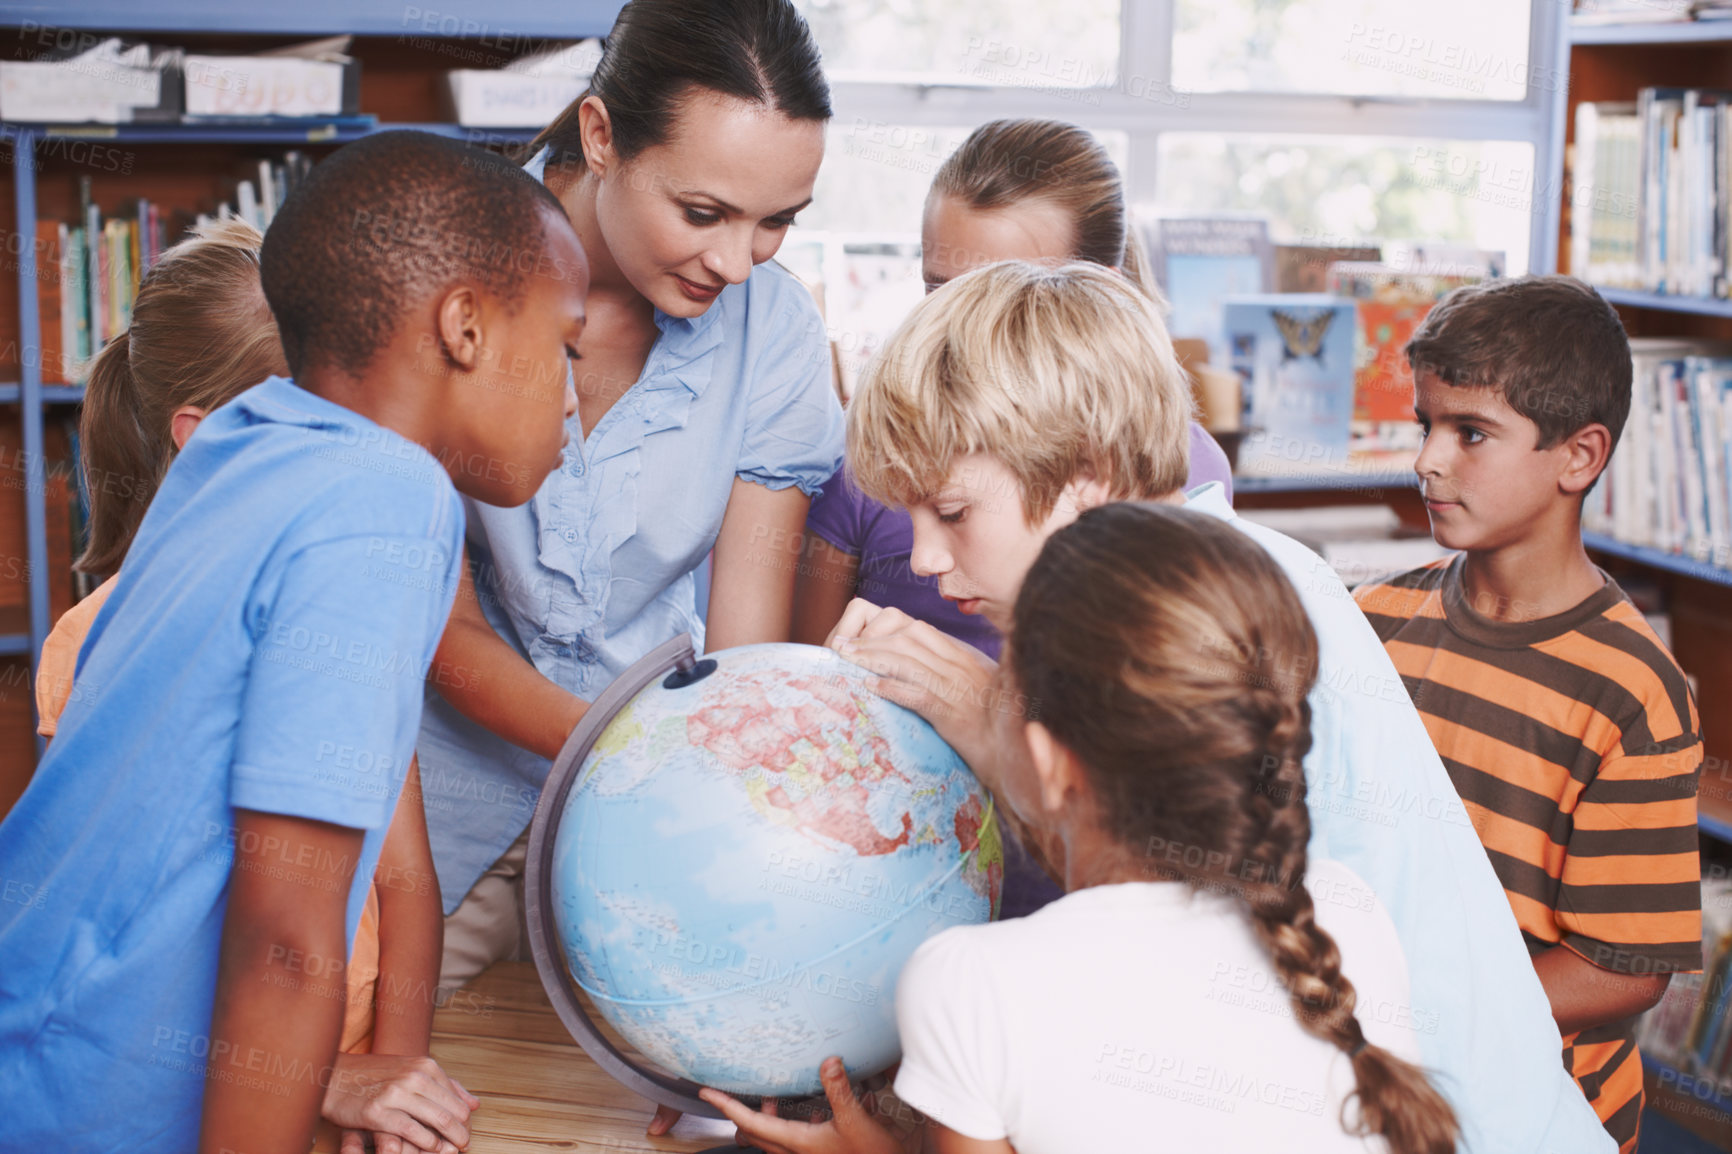 Buy stock photo A young boy looking at a world globe as his classmates and teacher watch